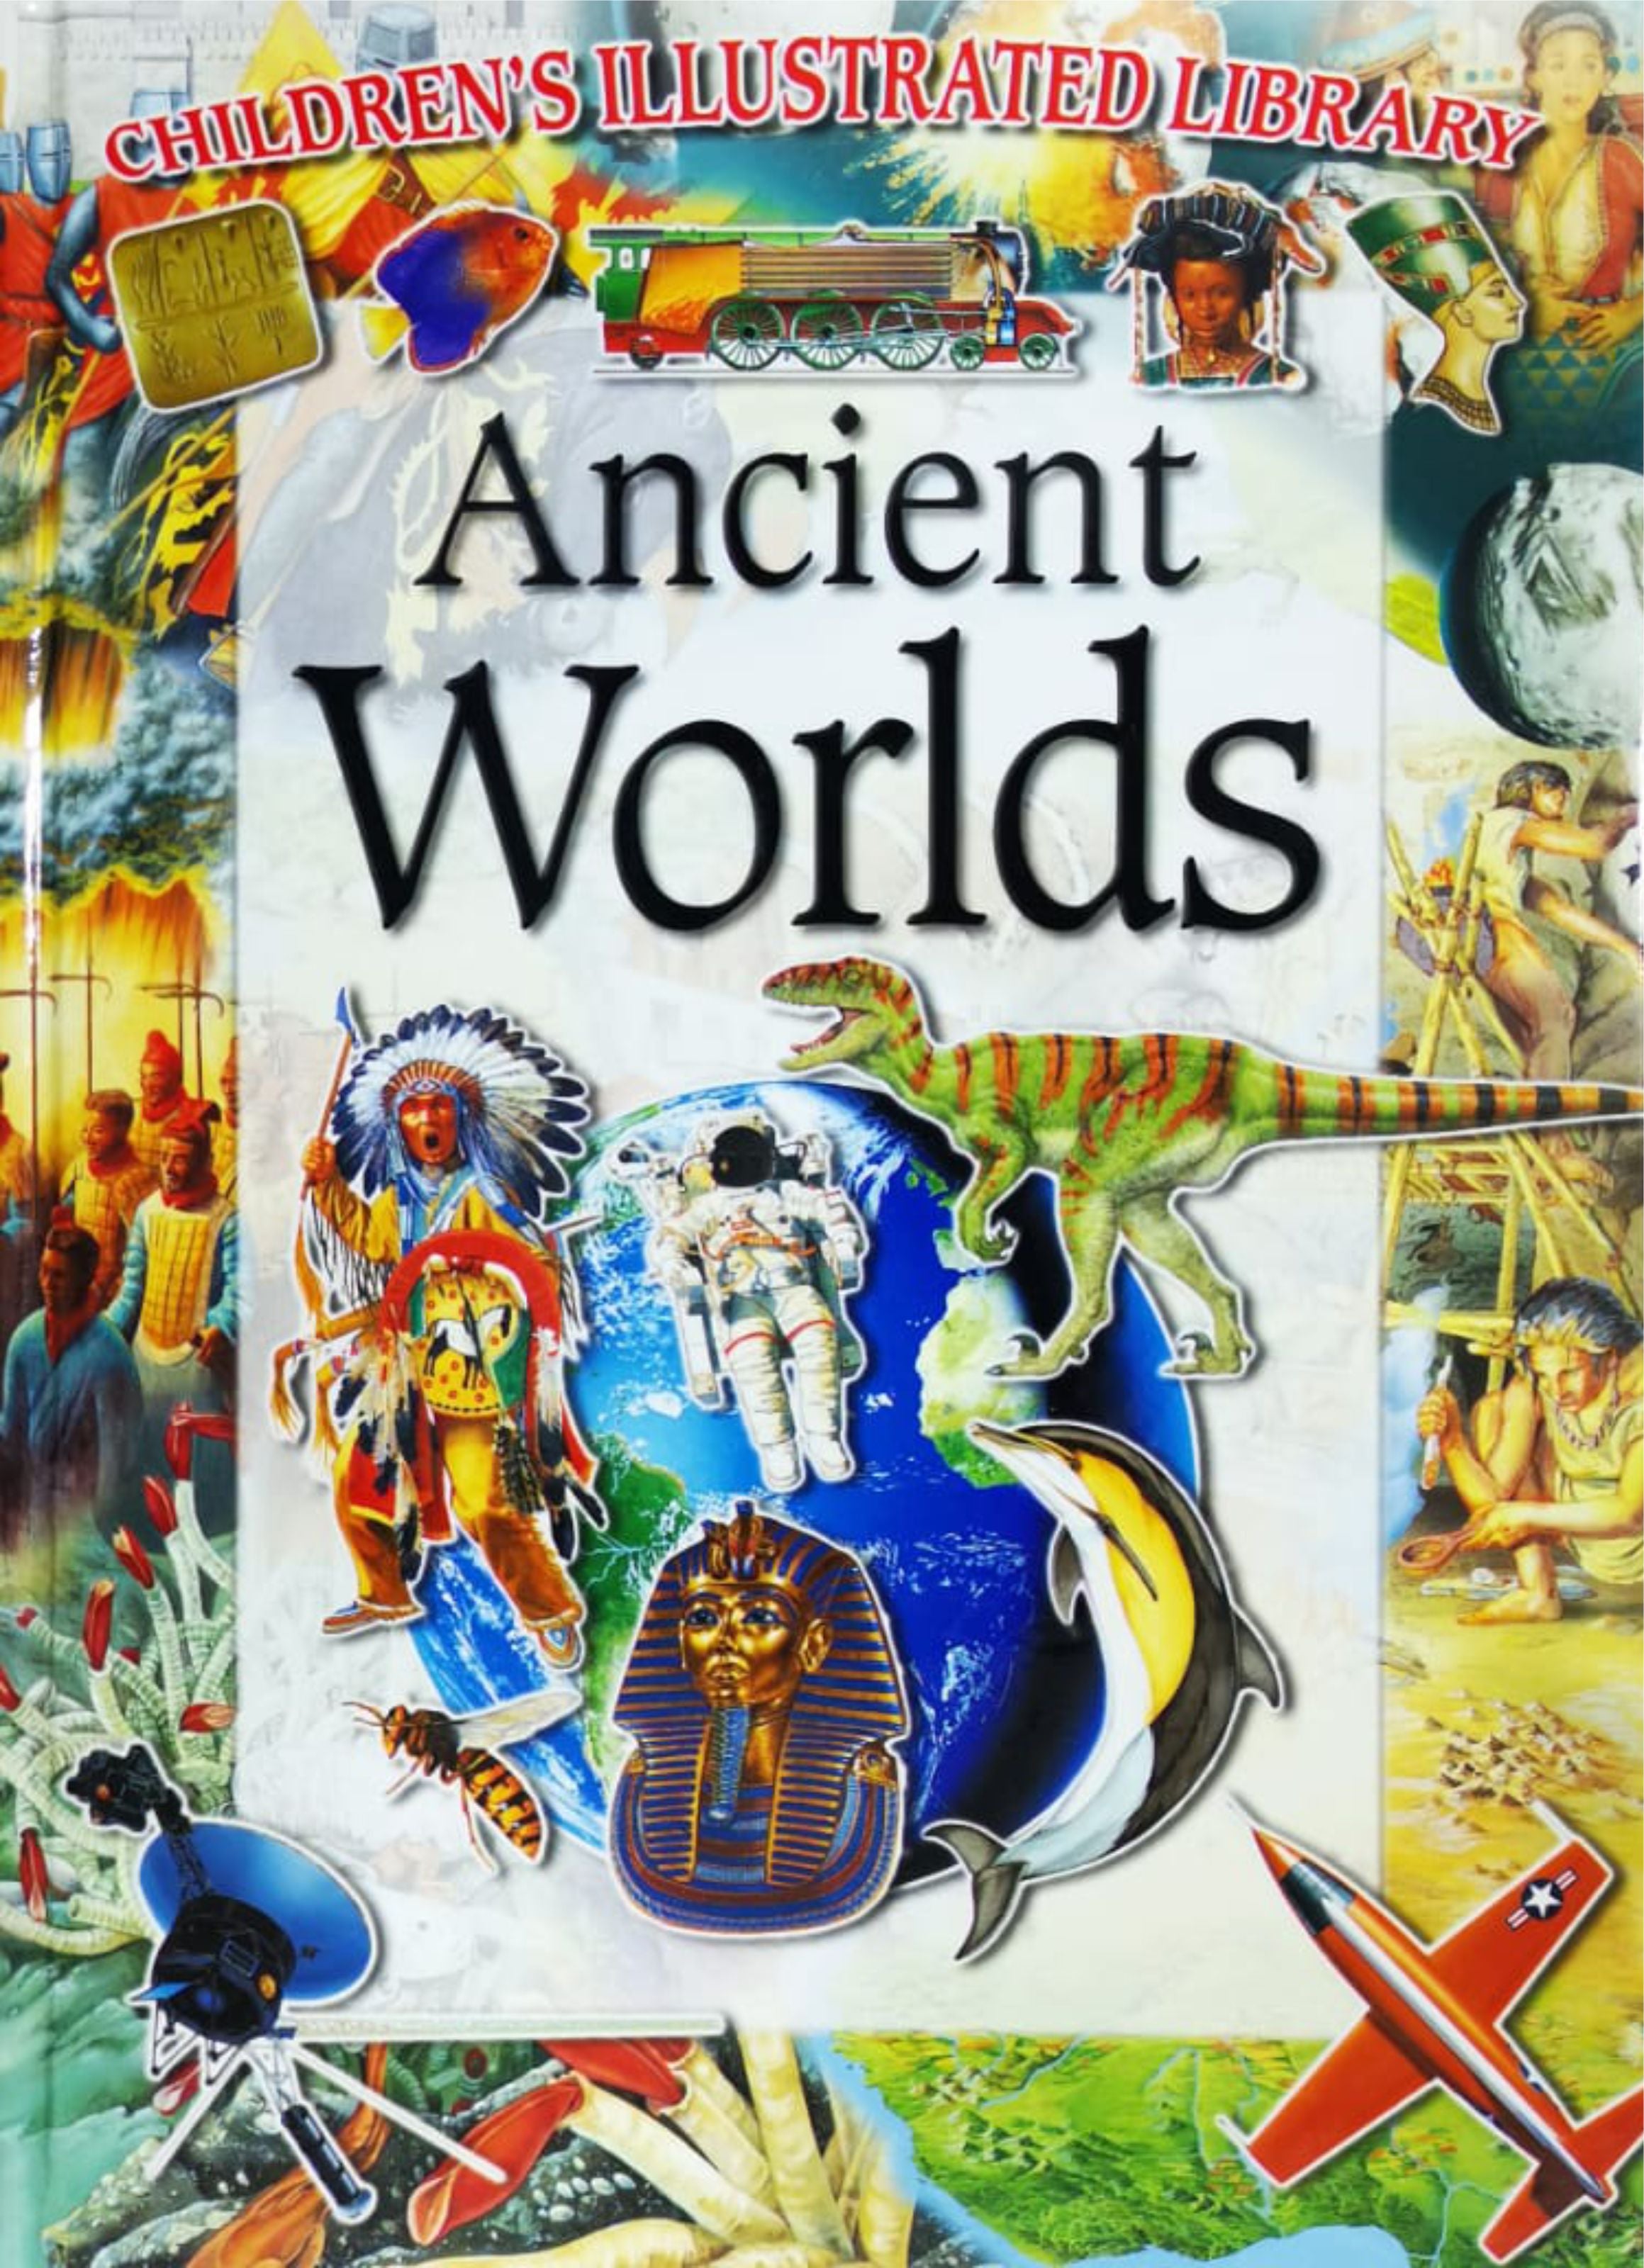 Ancient Worlds (Children's Illustrated Library)